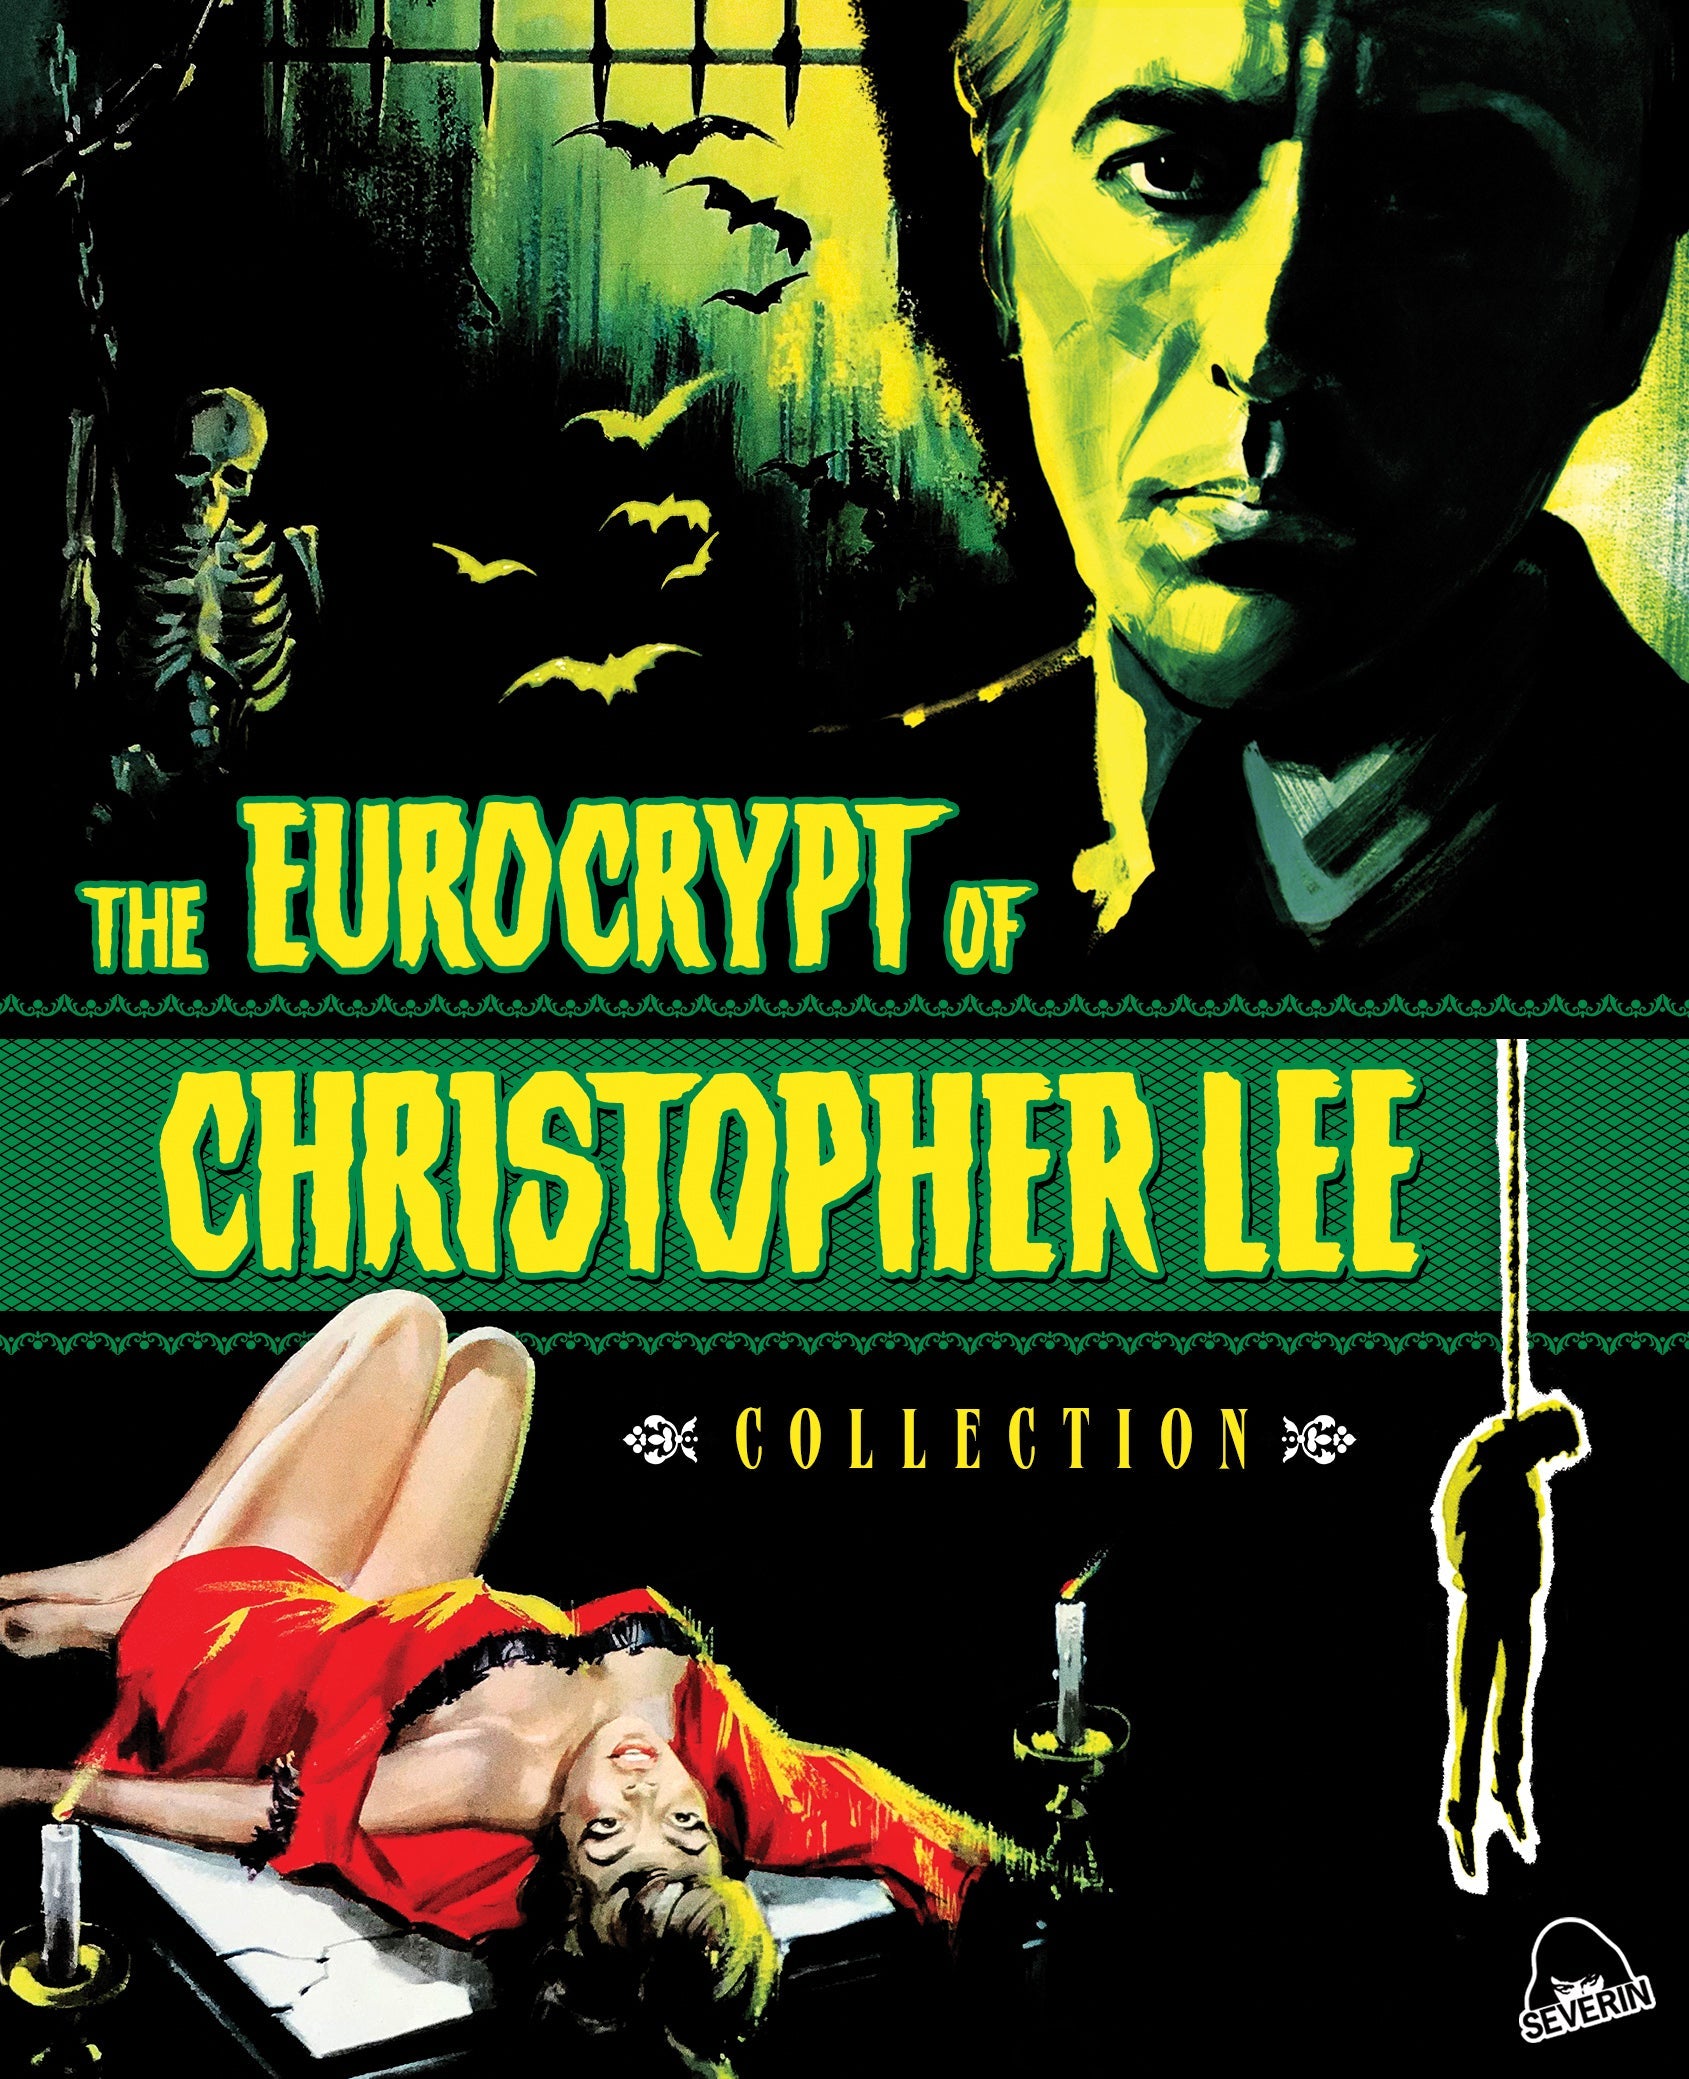 The Eurocrypt Of Christopher Lee Blu-Ray/cd Blu-Ray